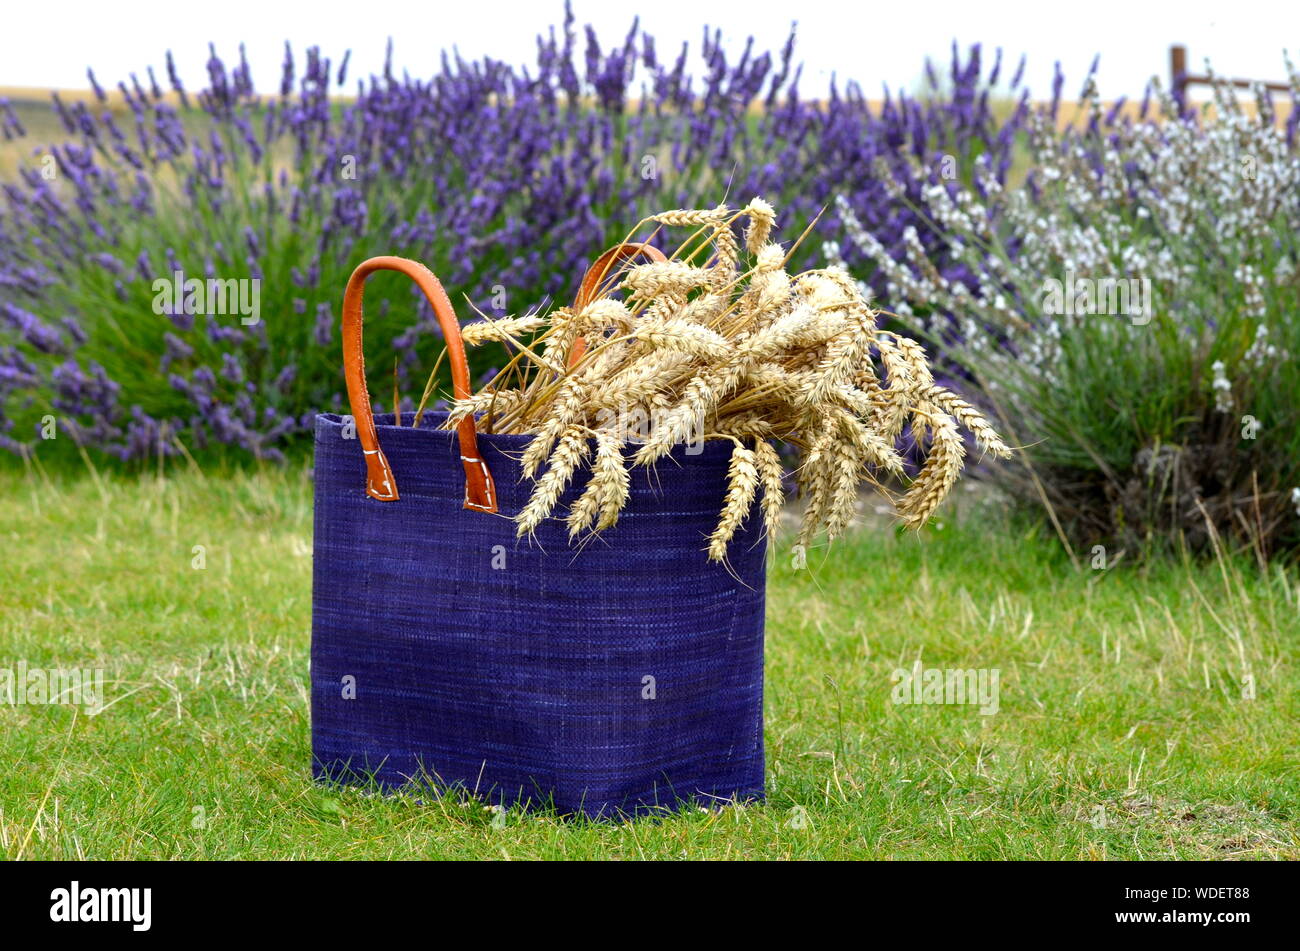 View Of Wheat Crop In Bag On Grass Area Stock Photo